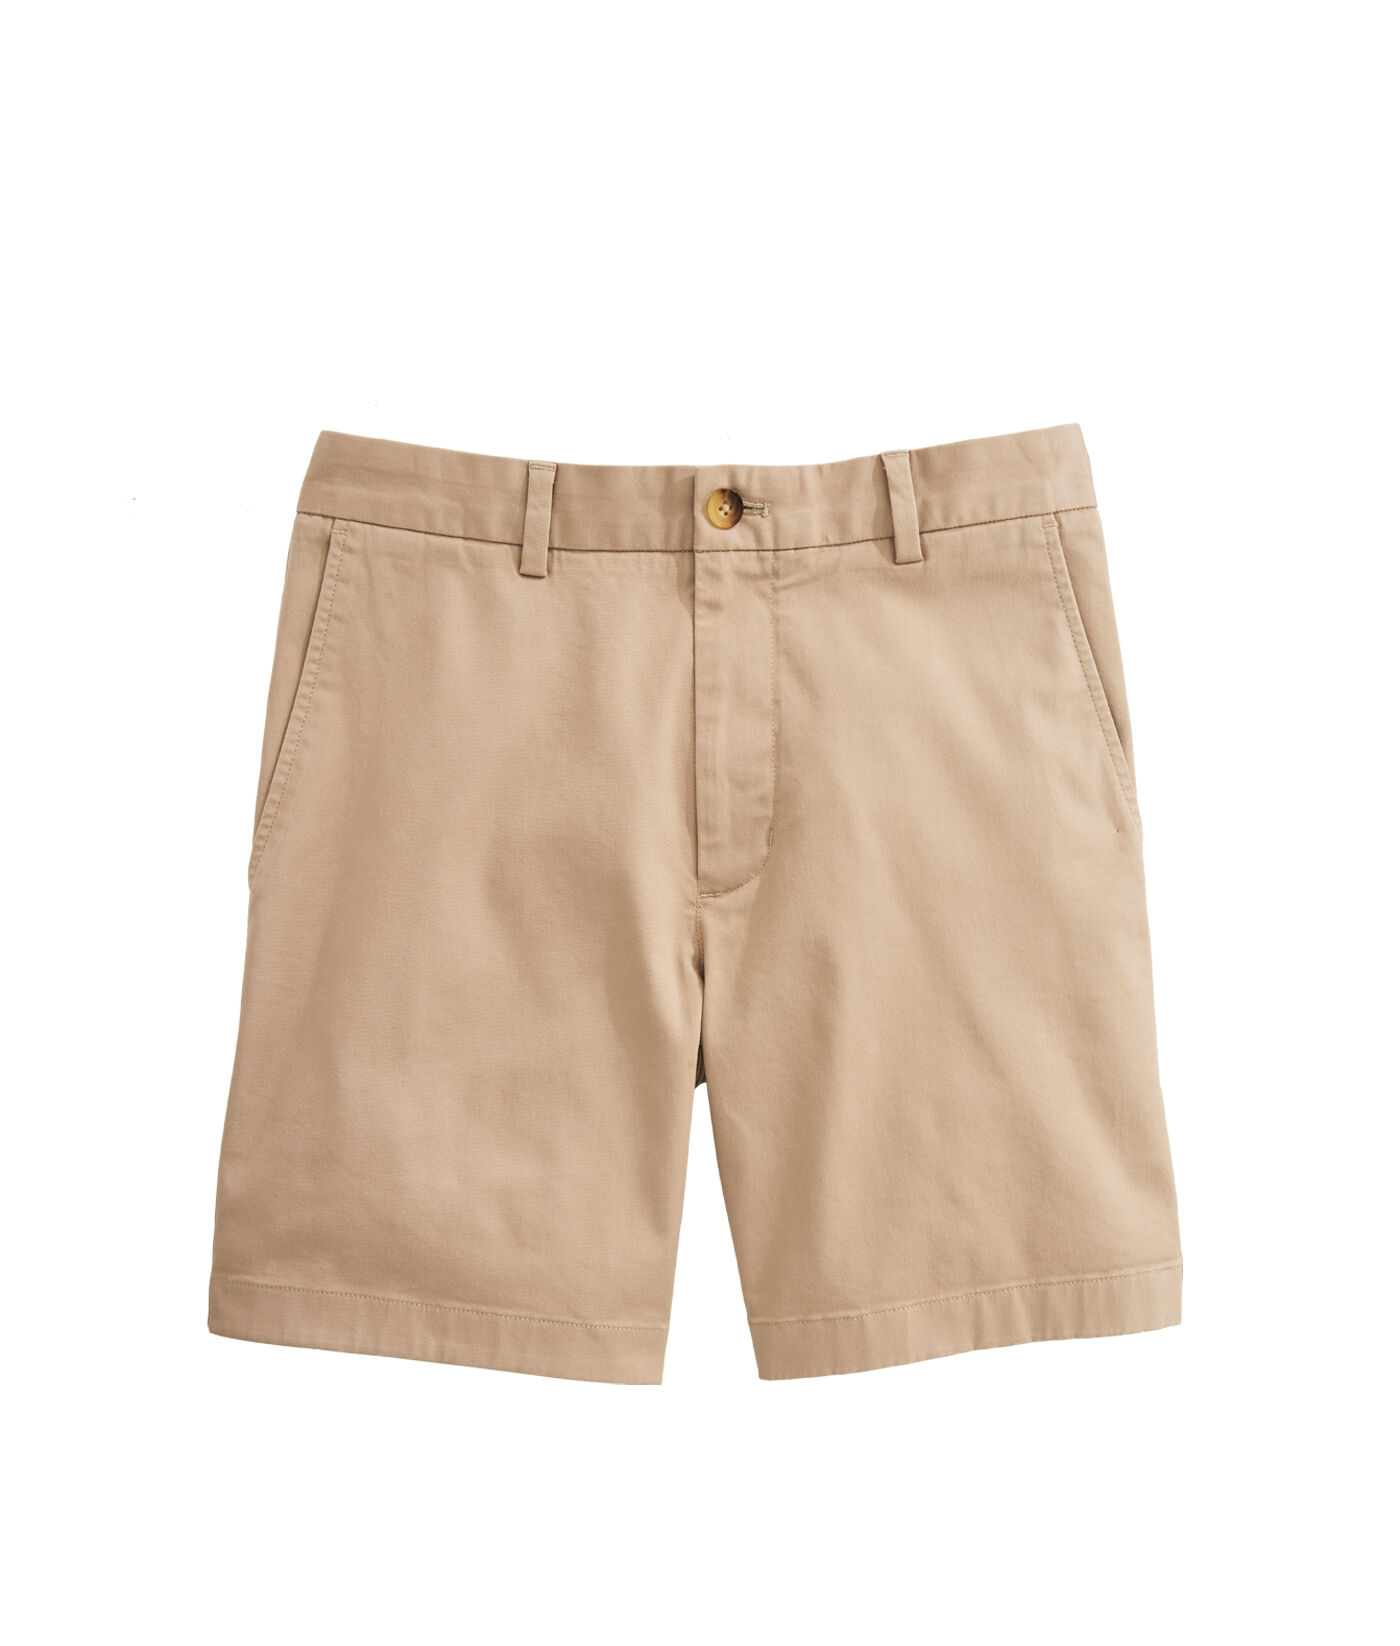 OUTLET 9 Inch Stretch Breaker Shorts